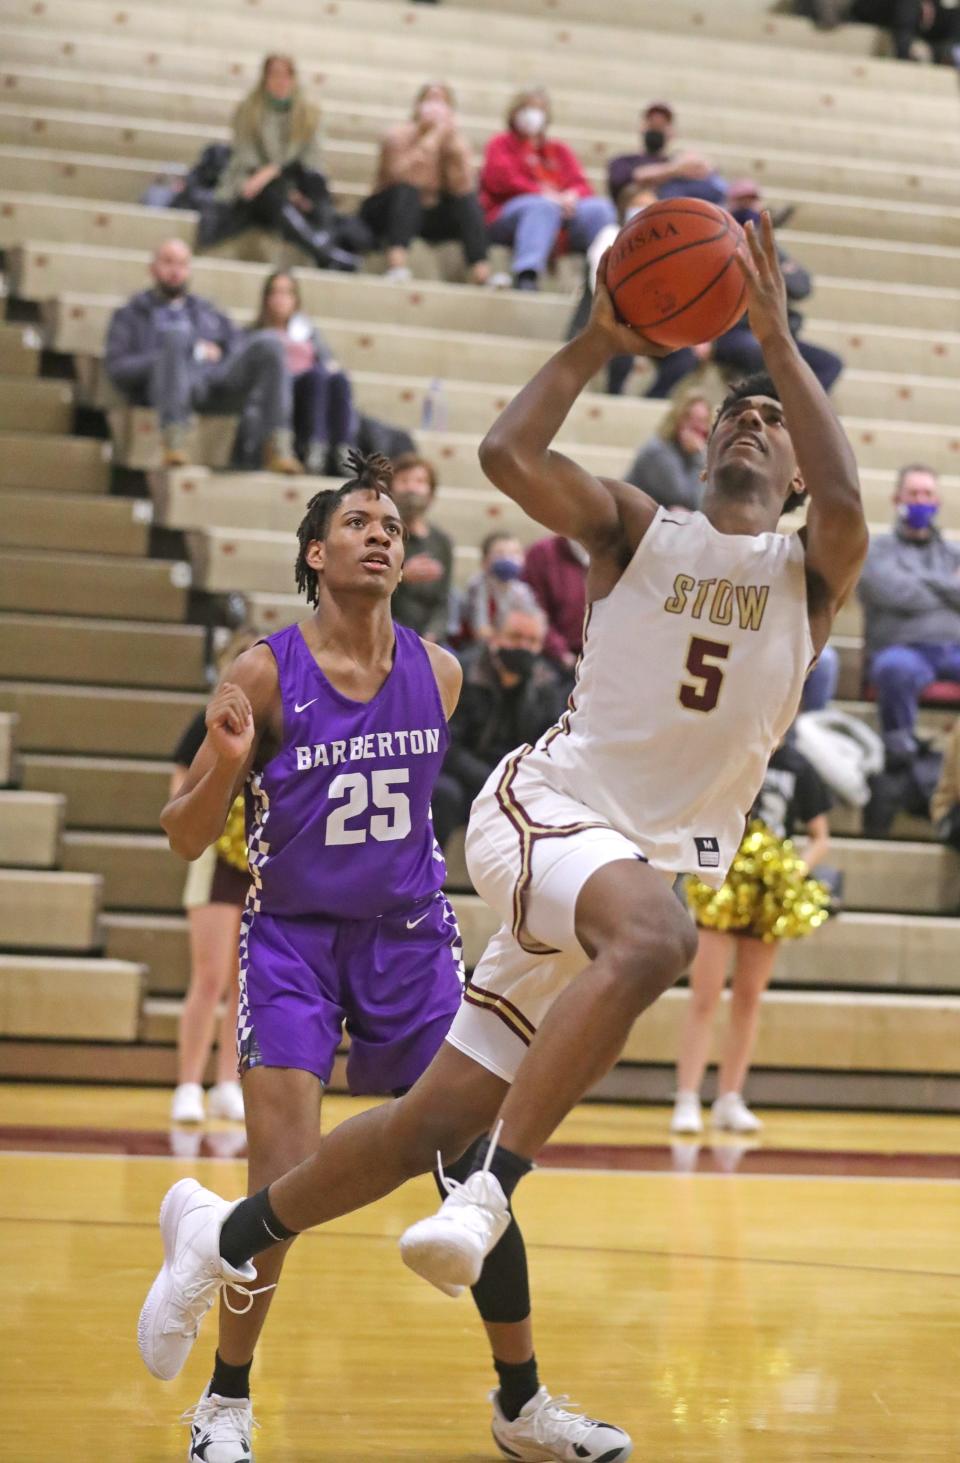 Stow's Marvin Campbell puts up a shot in front of Barberton's Anthony Easter on Tuesday, Jan. 18, 2022 in Stow, Ohio.  [Phil Masturzo/ Beacon Journal]